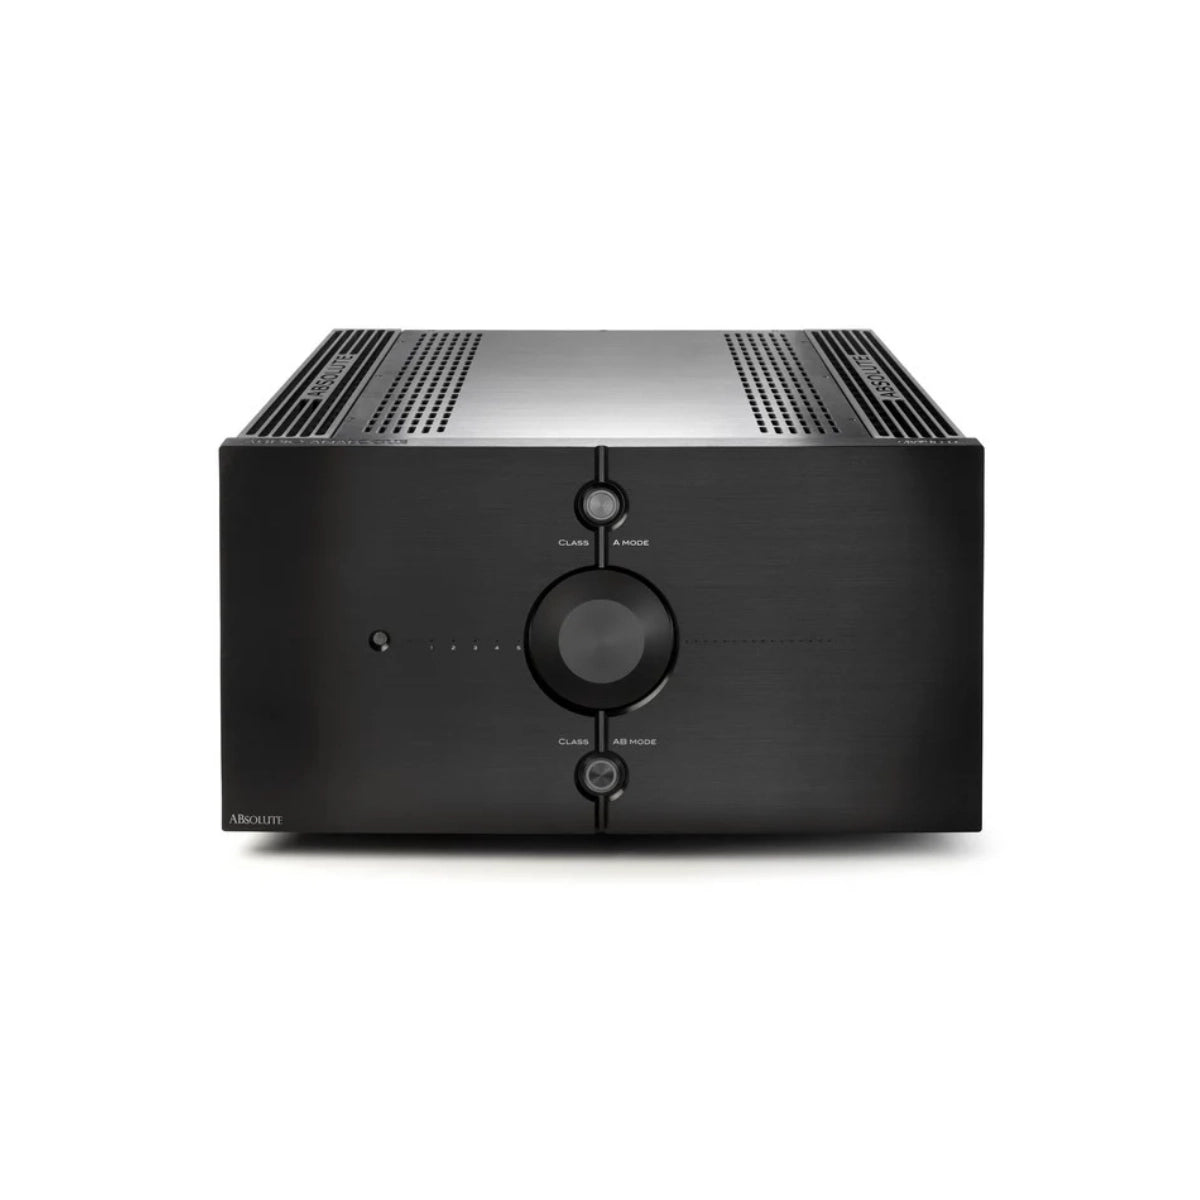 An image of Audio Analogue's Absolute 50w pure class-a integrated amplifier in black finish, RR version.